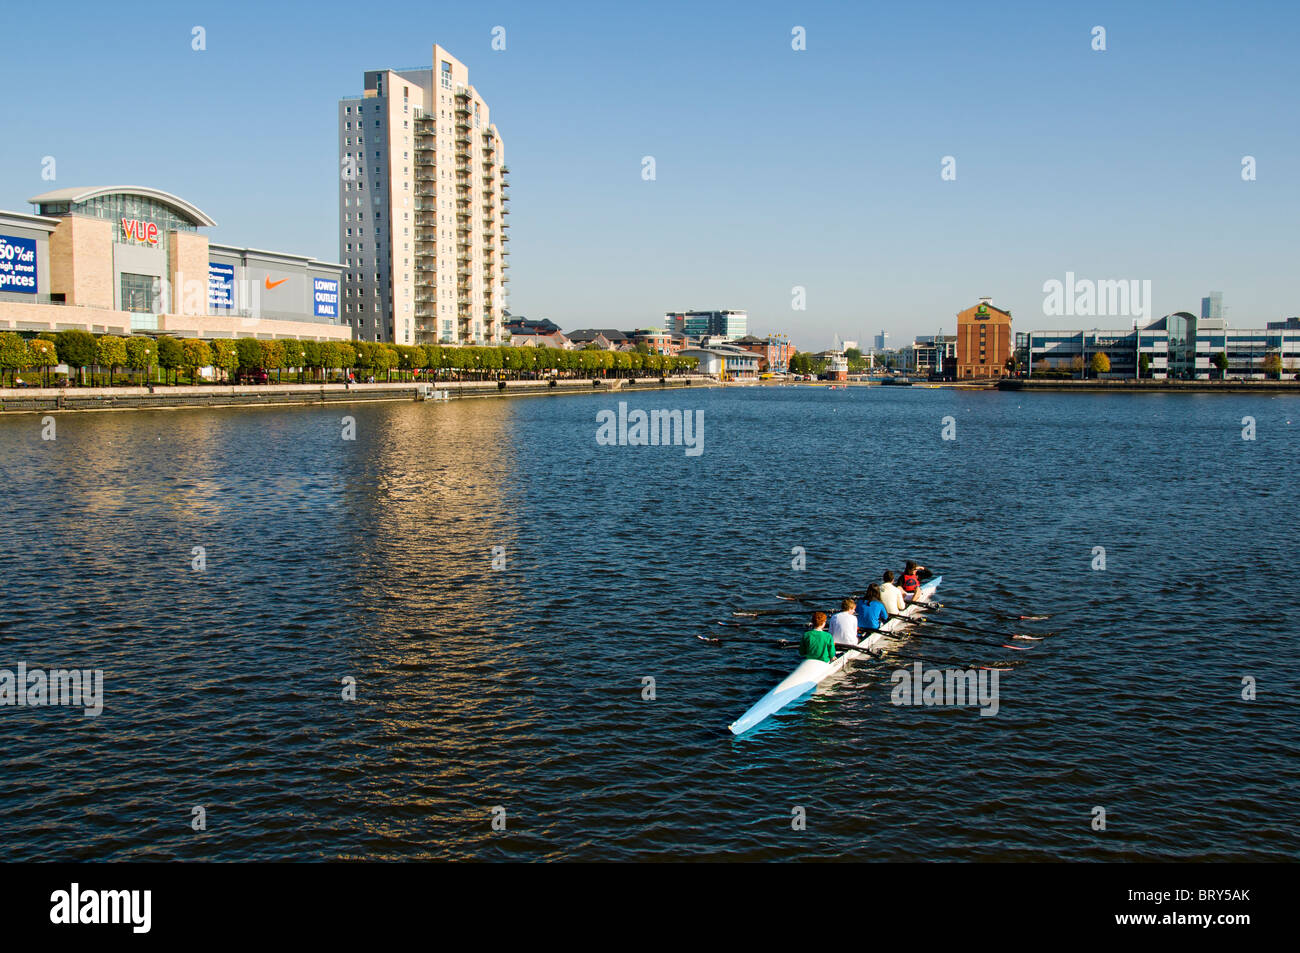 Two persons sculling (rowing) on the Manchester Ship Canal near the Lowry Outlet Mall,  Salford Quays, Manchester, UK Stock Photo